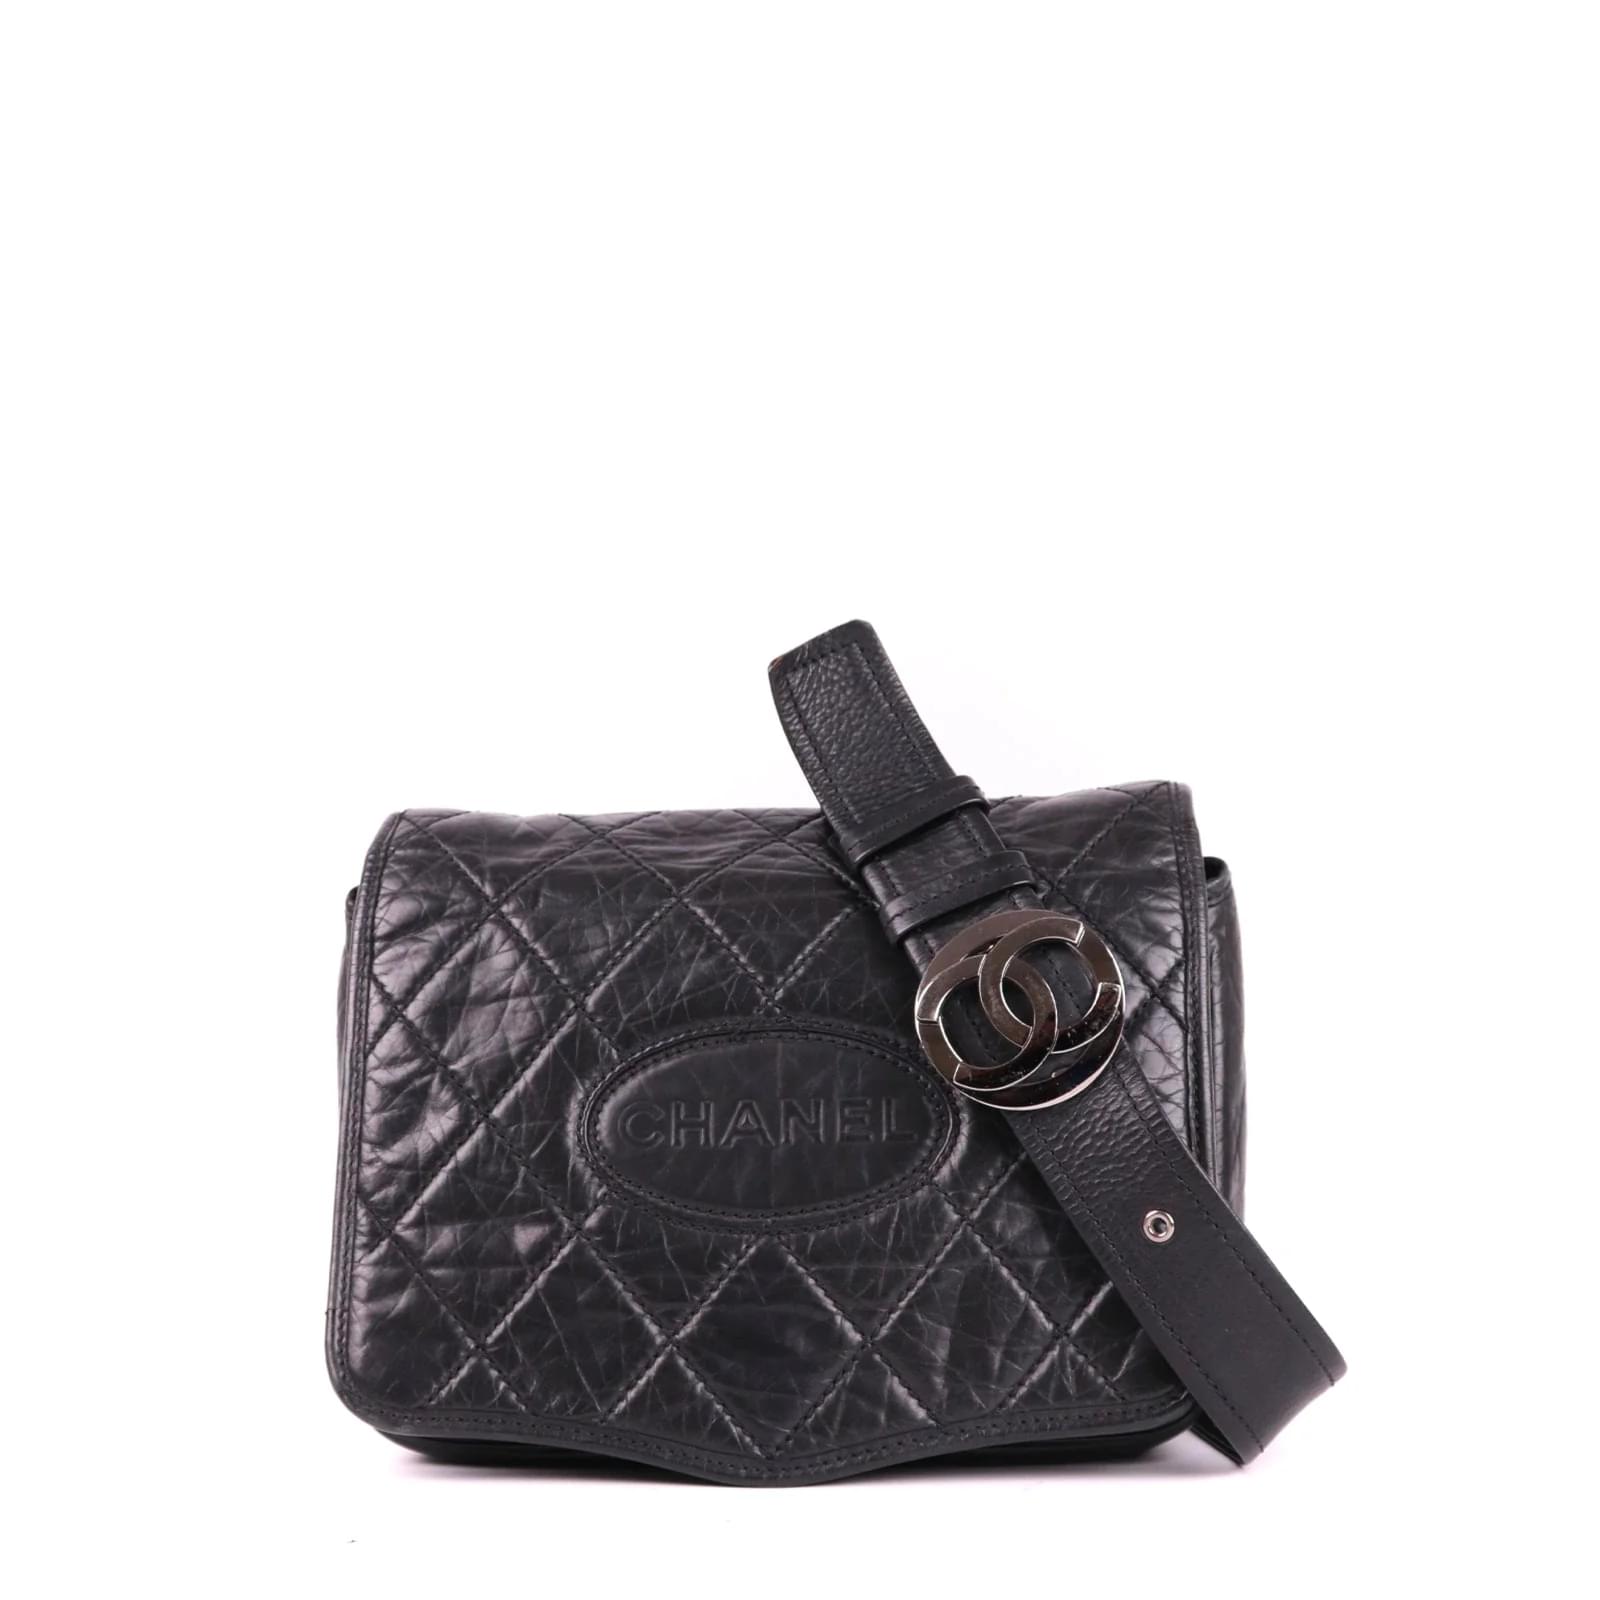 CHANEL, Bags, Chanel Quilted Matelasse Cc Logo Lambskin Tote